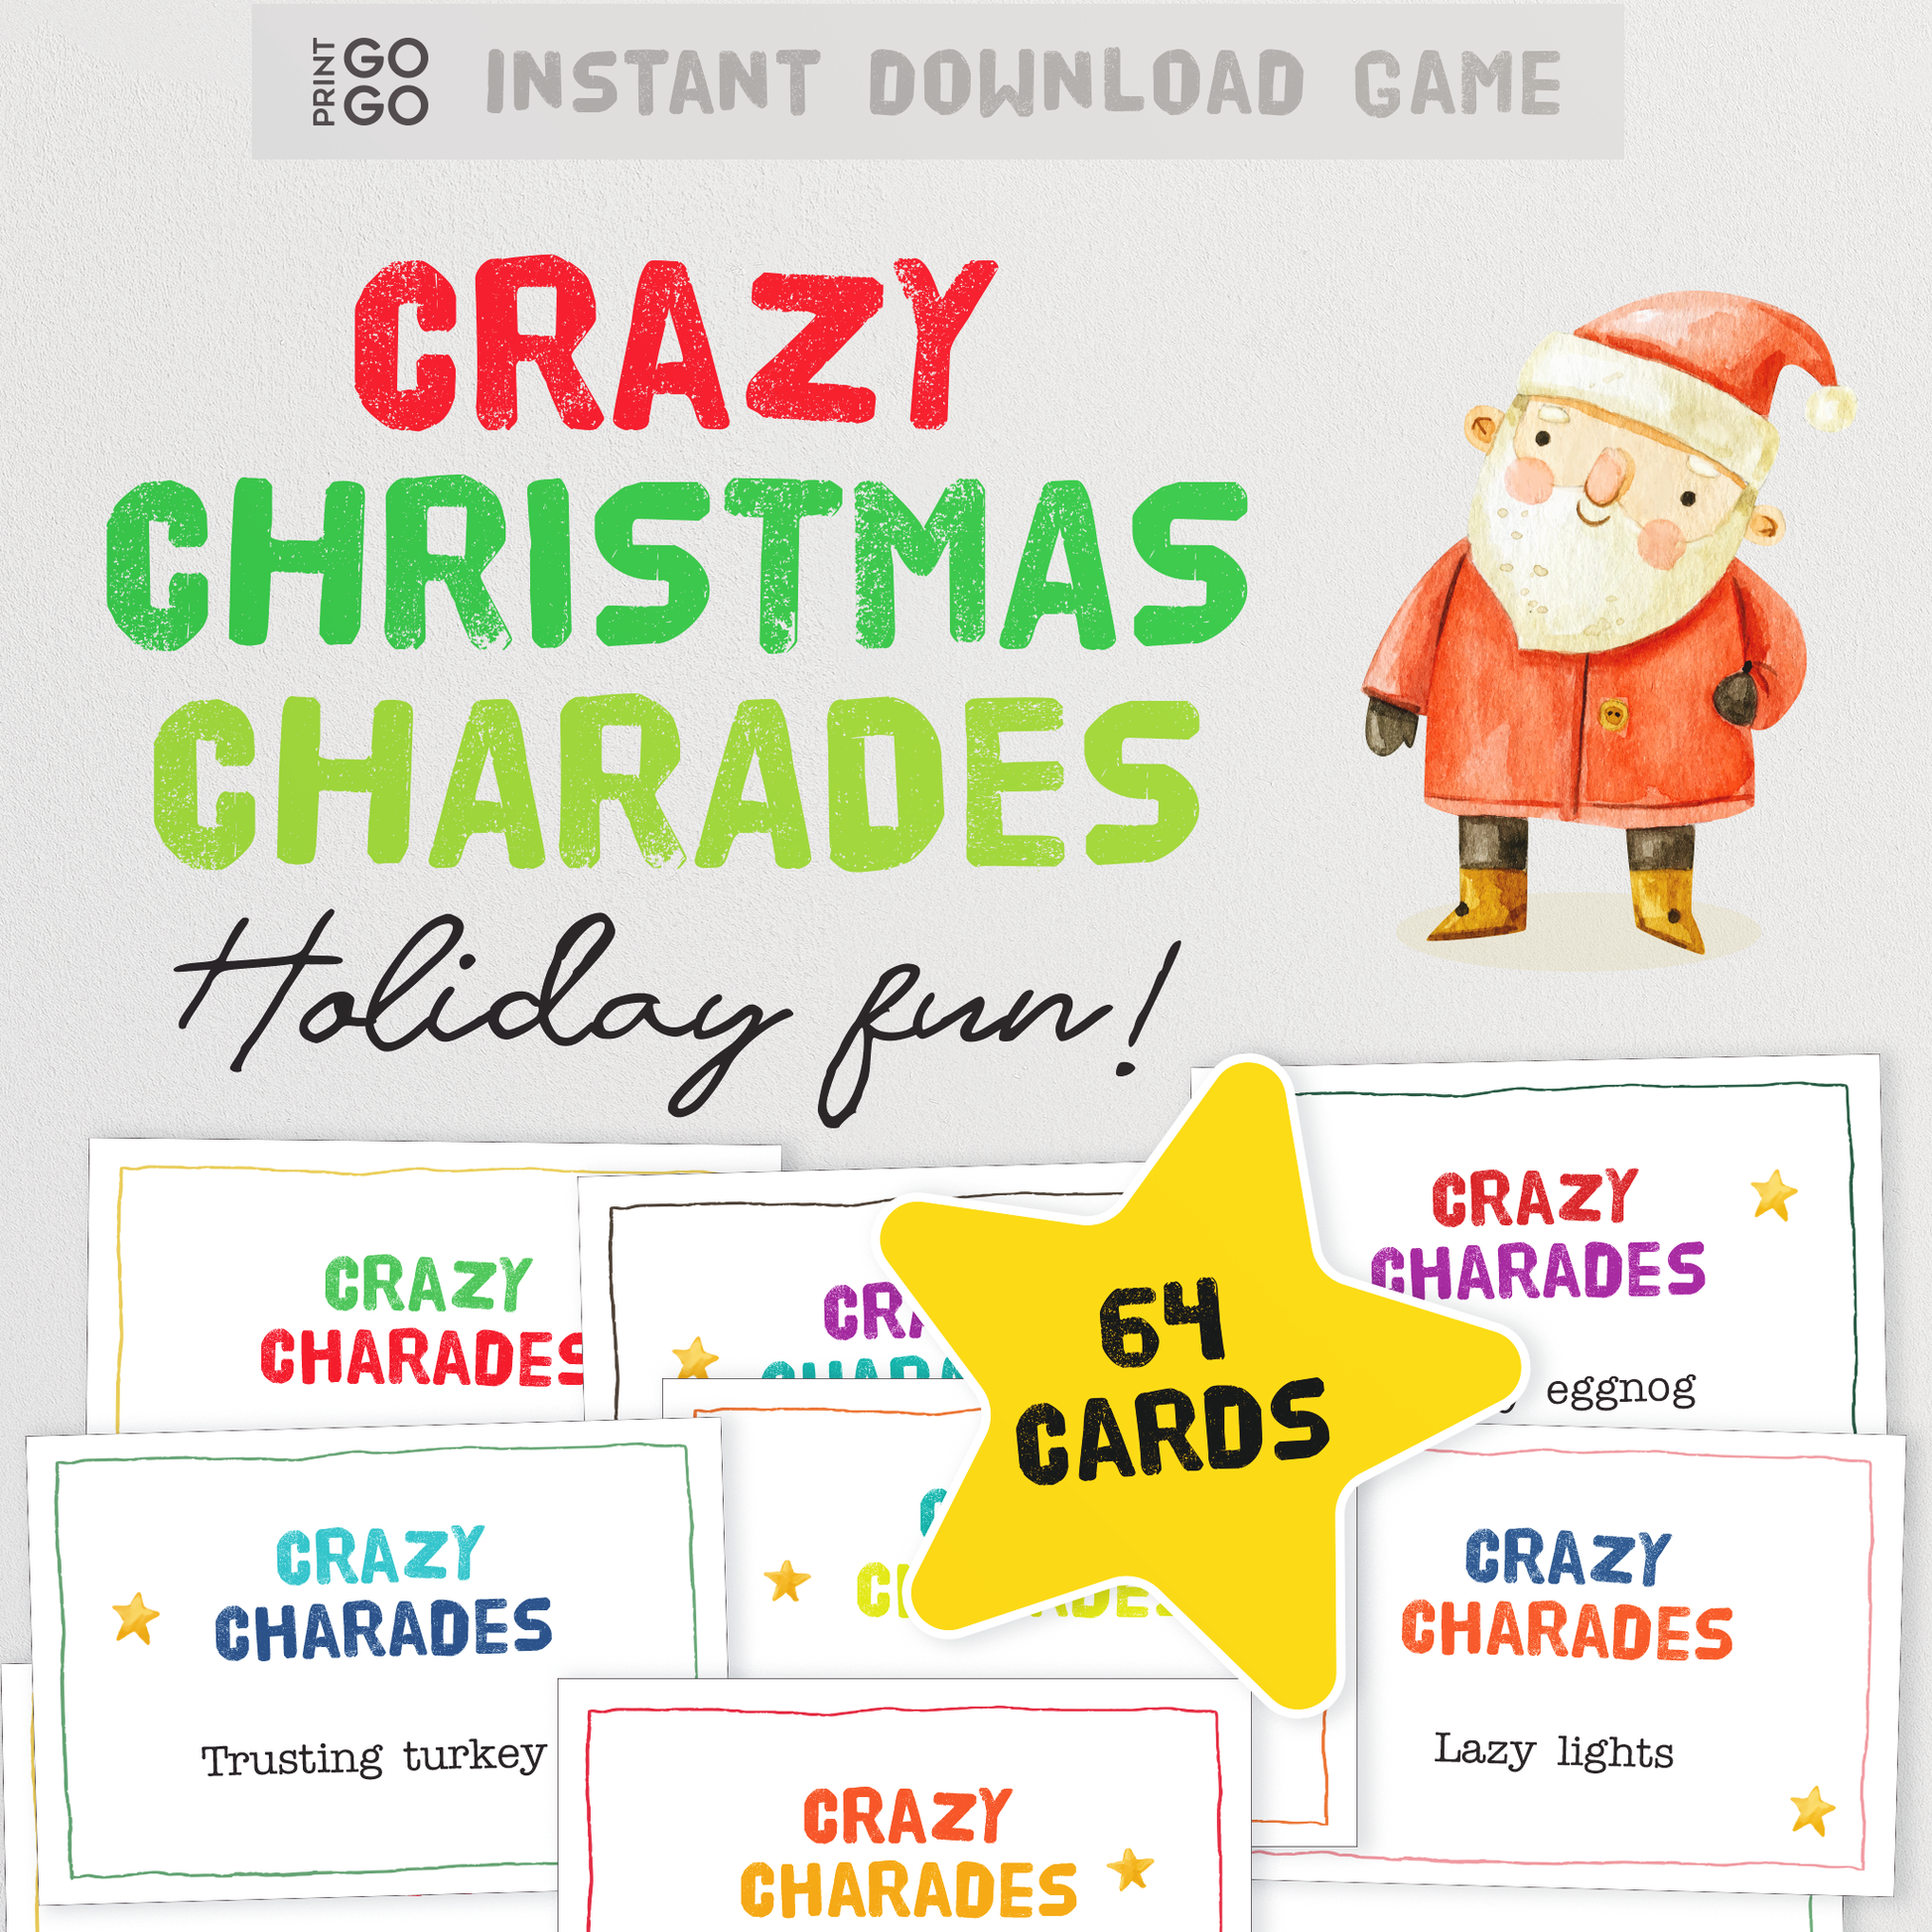 Crazy Christmas Charades Game - The Hilarious Family Party Game